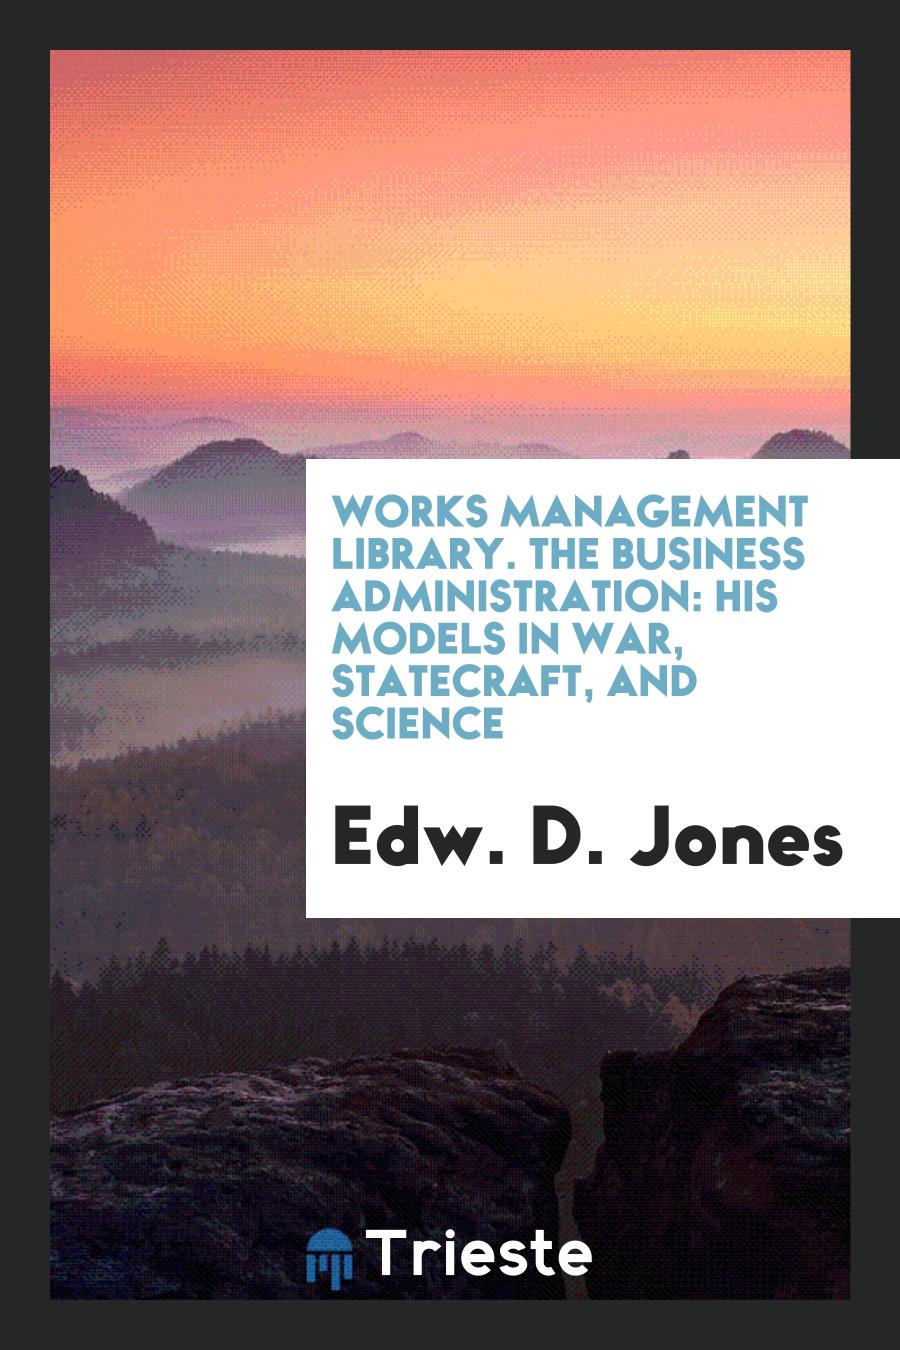 Works Management Library. The Business Administration: His Models in War, Statecraft, and Science